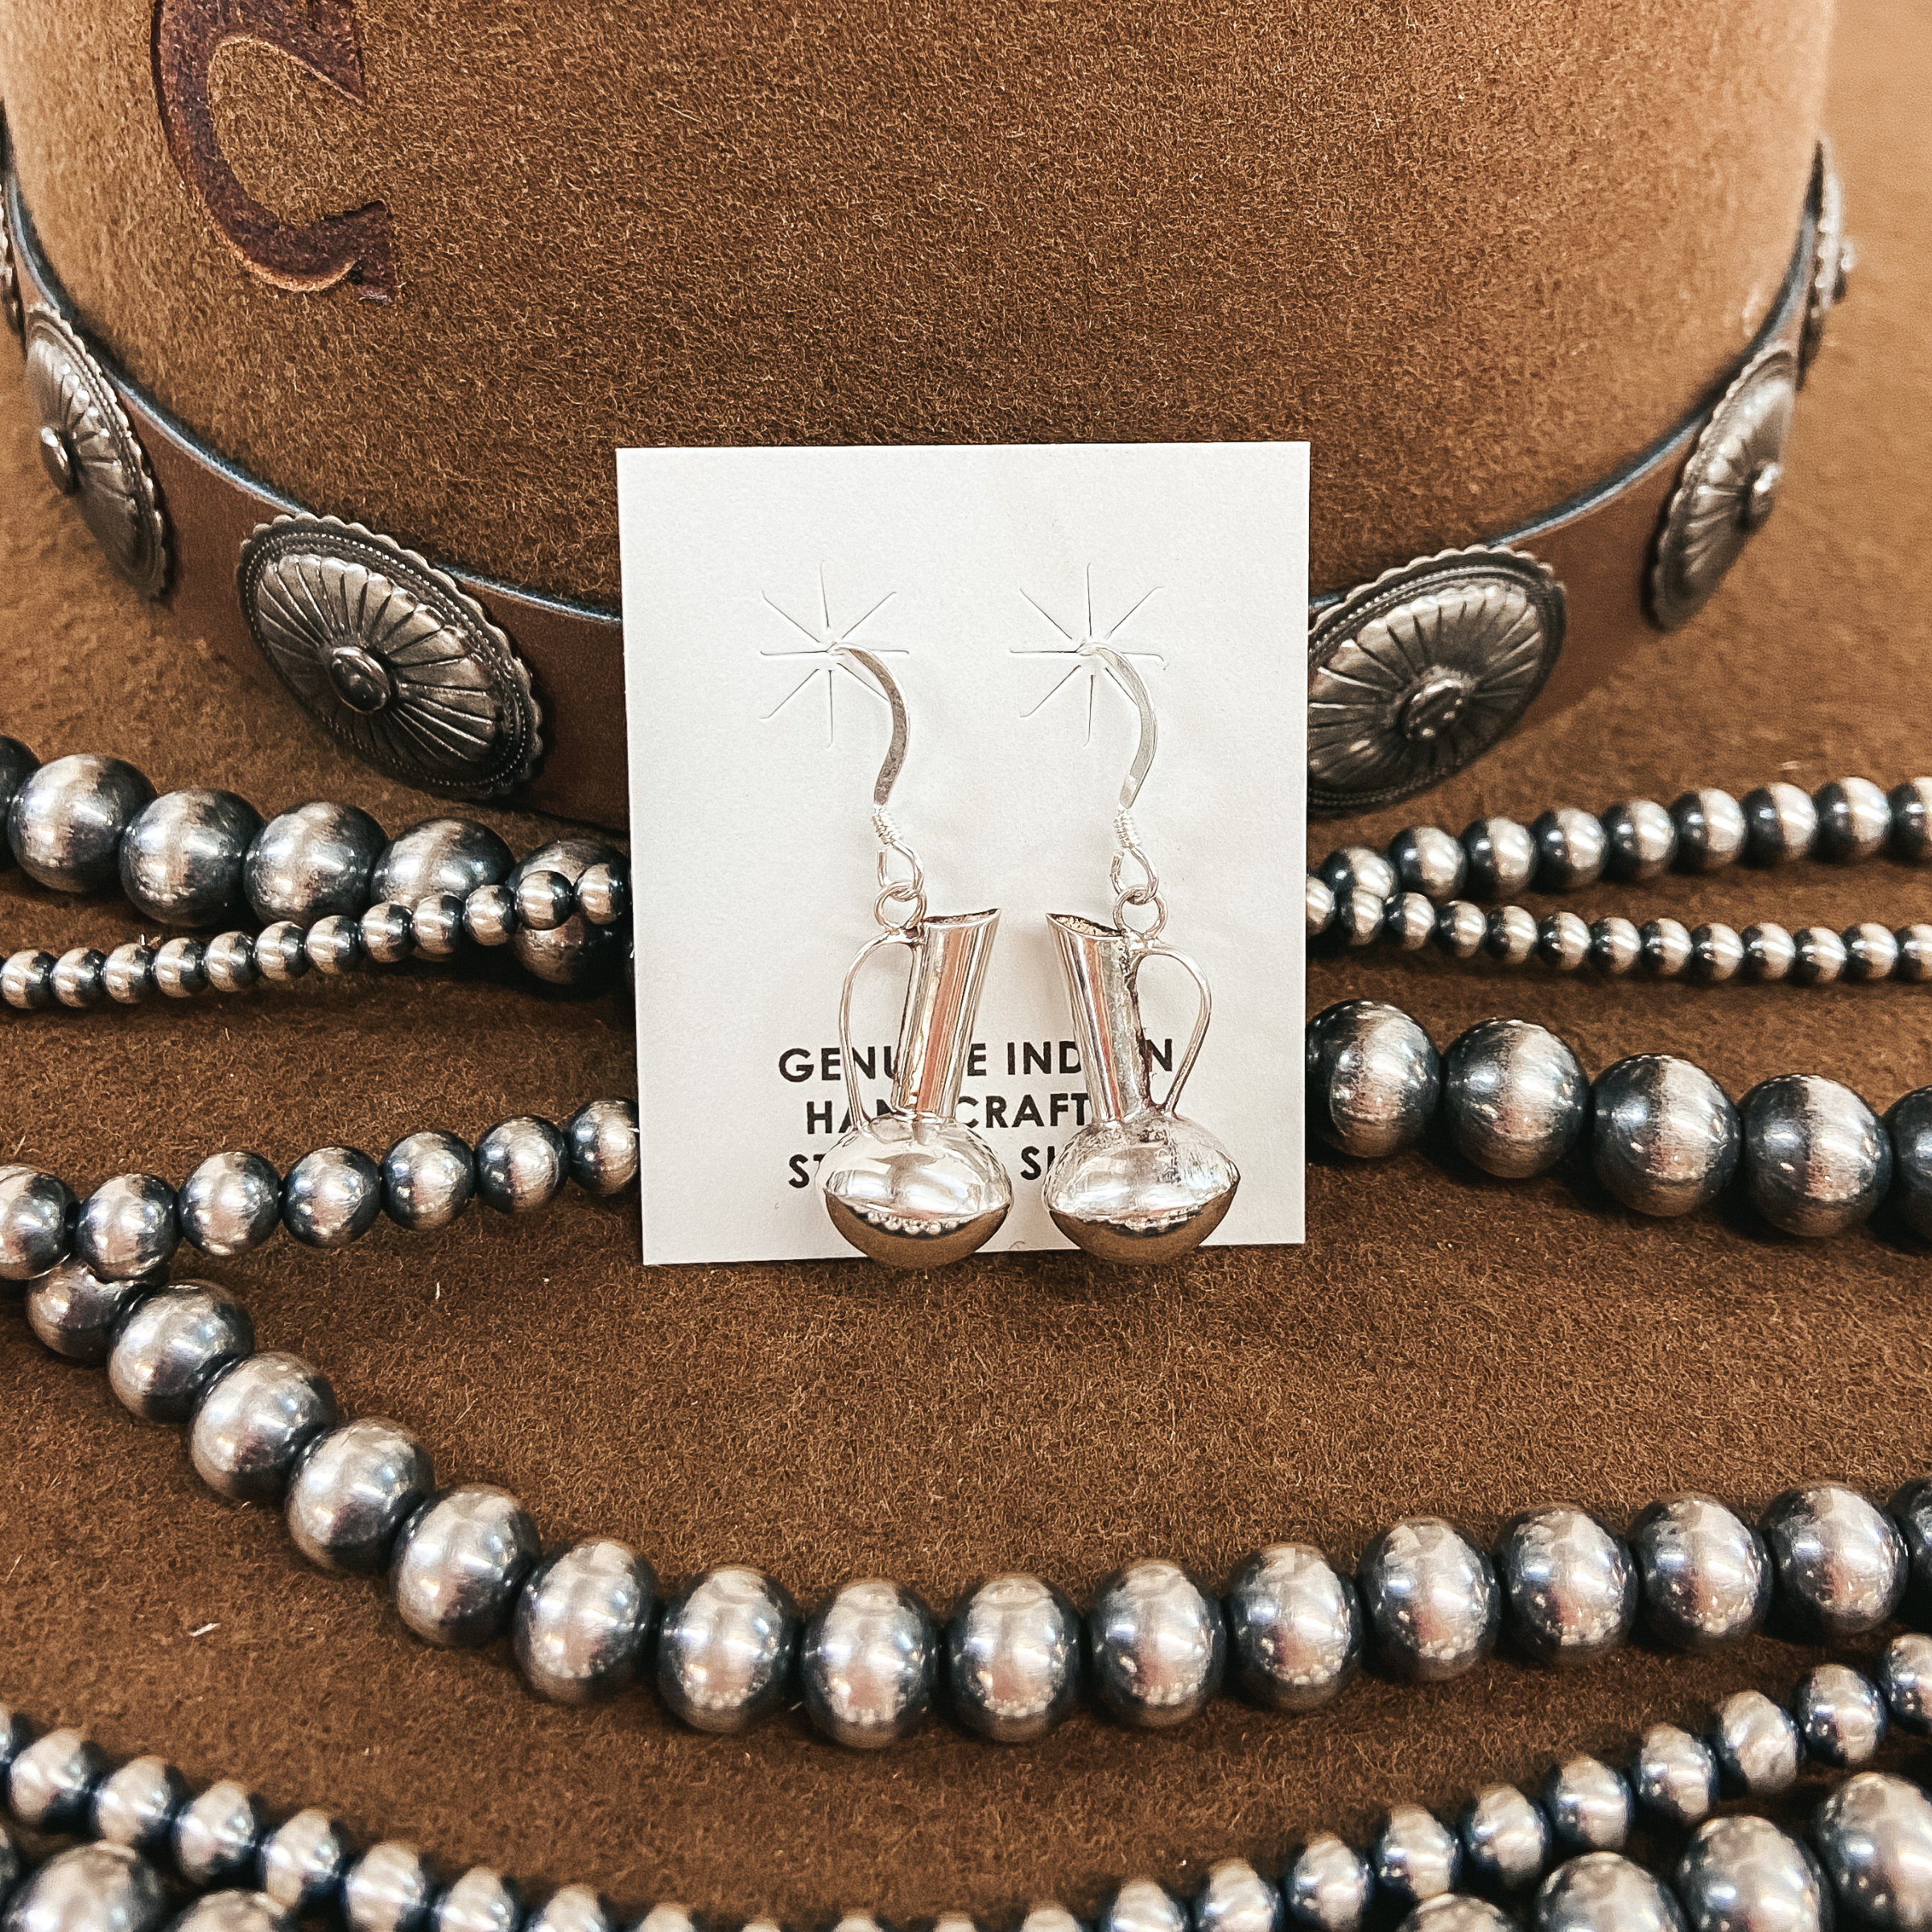 Sterling silver pitcher shaped earrings on sterling silver fishhook. Pictured on a brown felt hat with Navajo pearls.